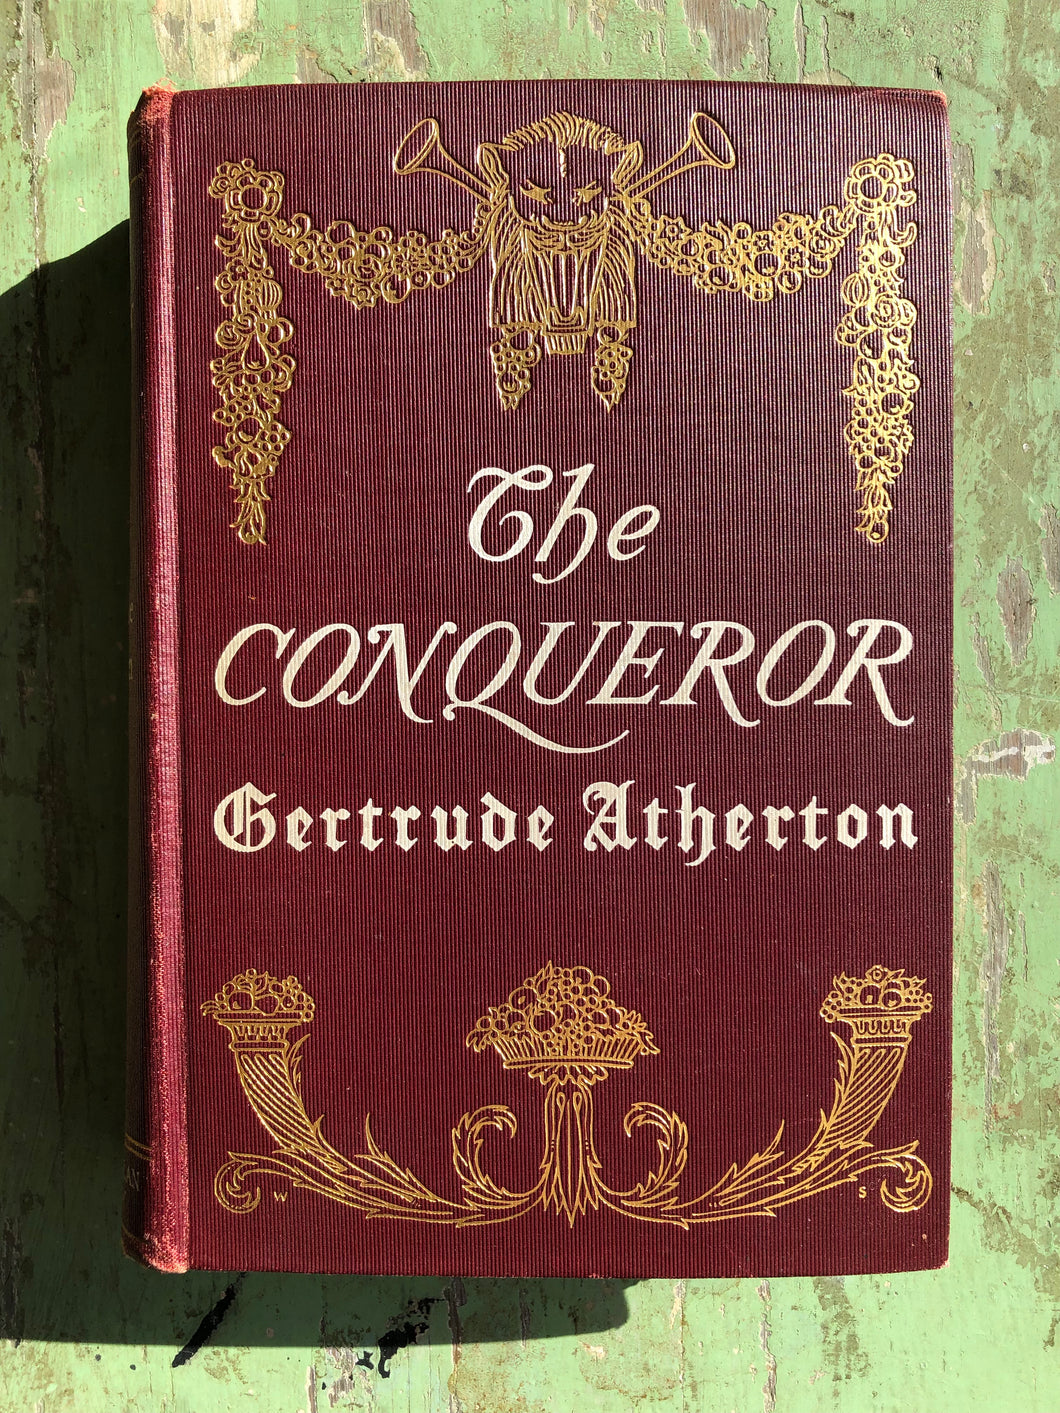 The Conqueror: Being the True and Romantic Story of Alexander Hamilton by Gertrude Franklin Atherton